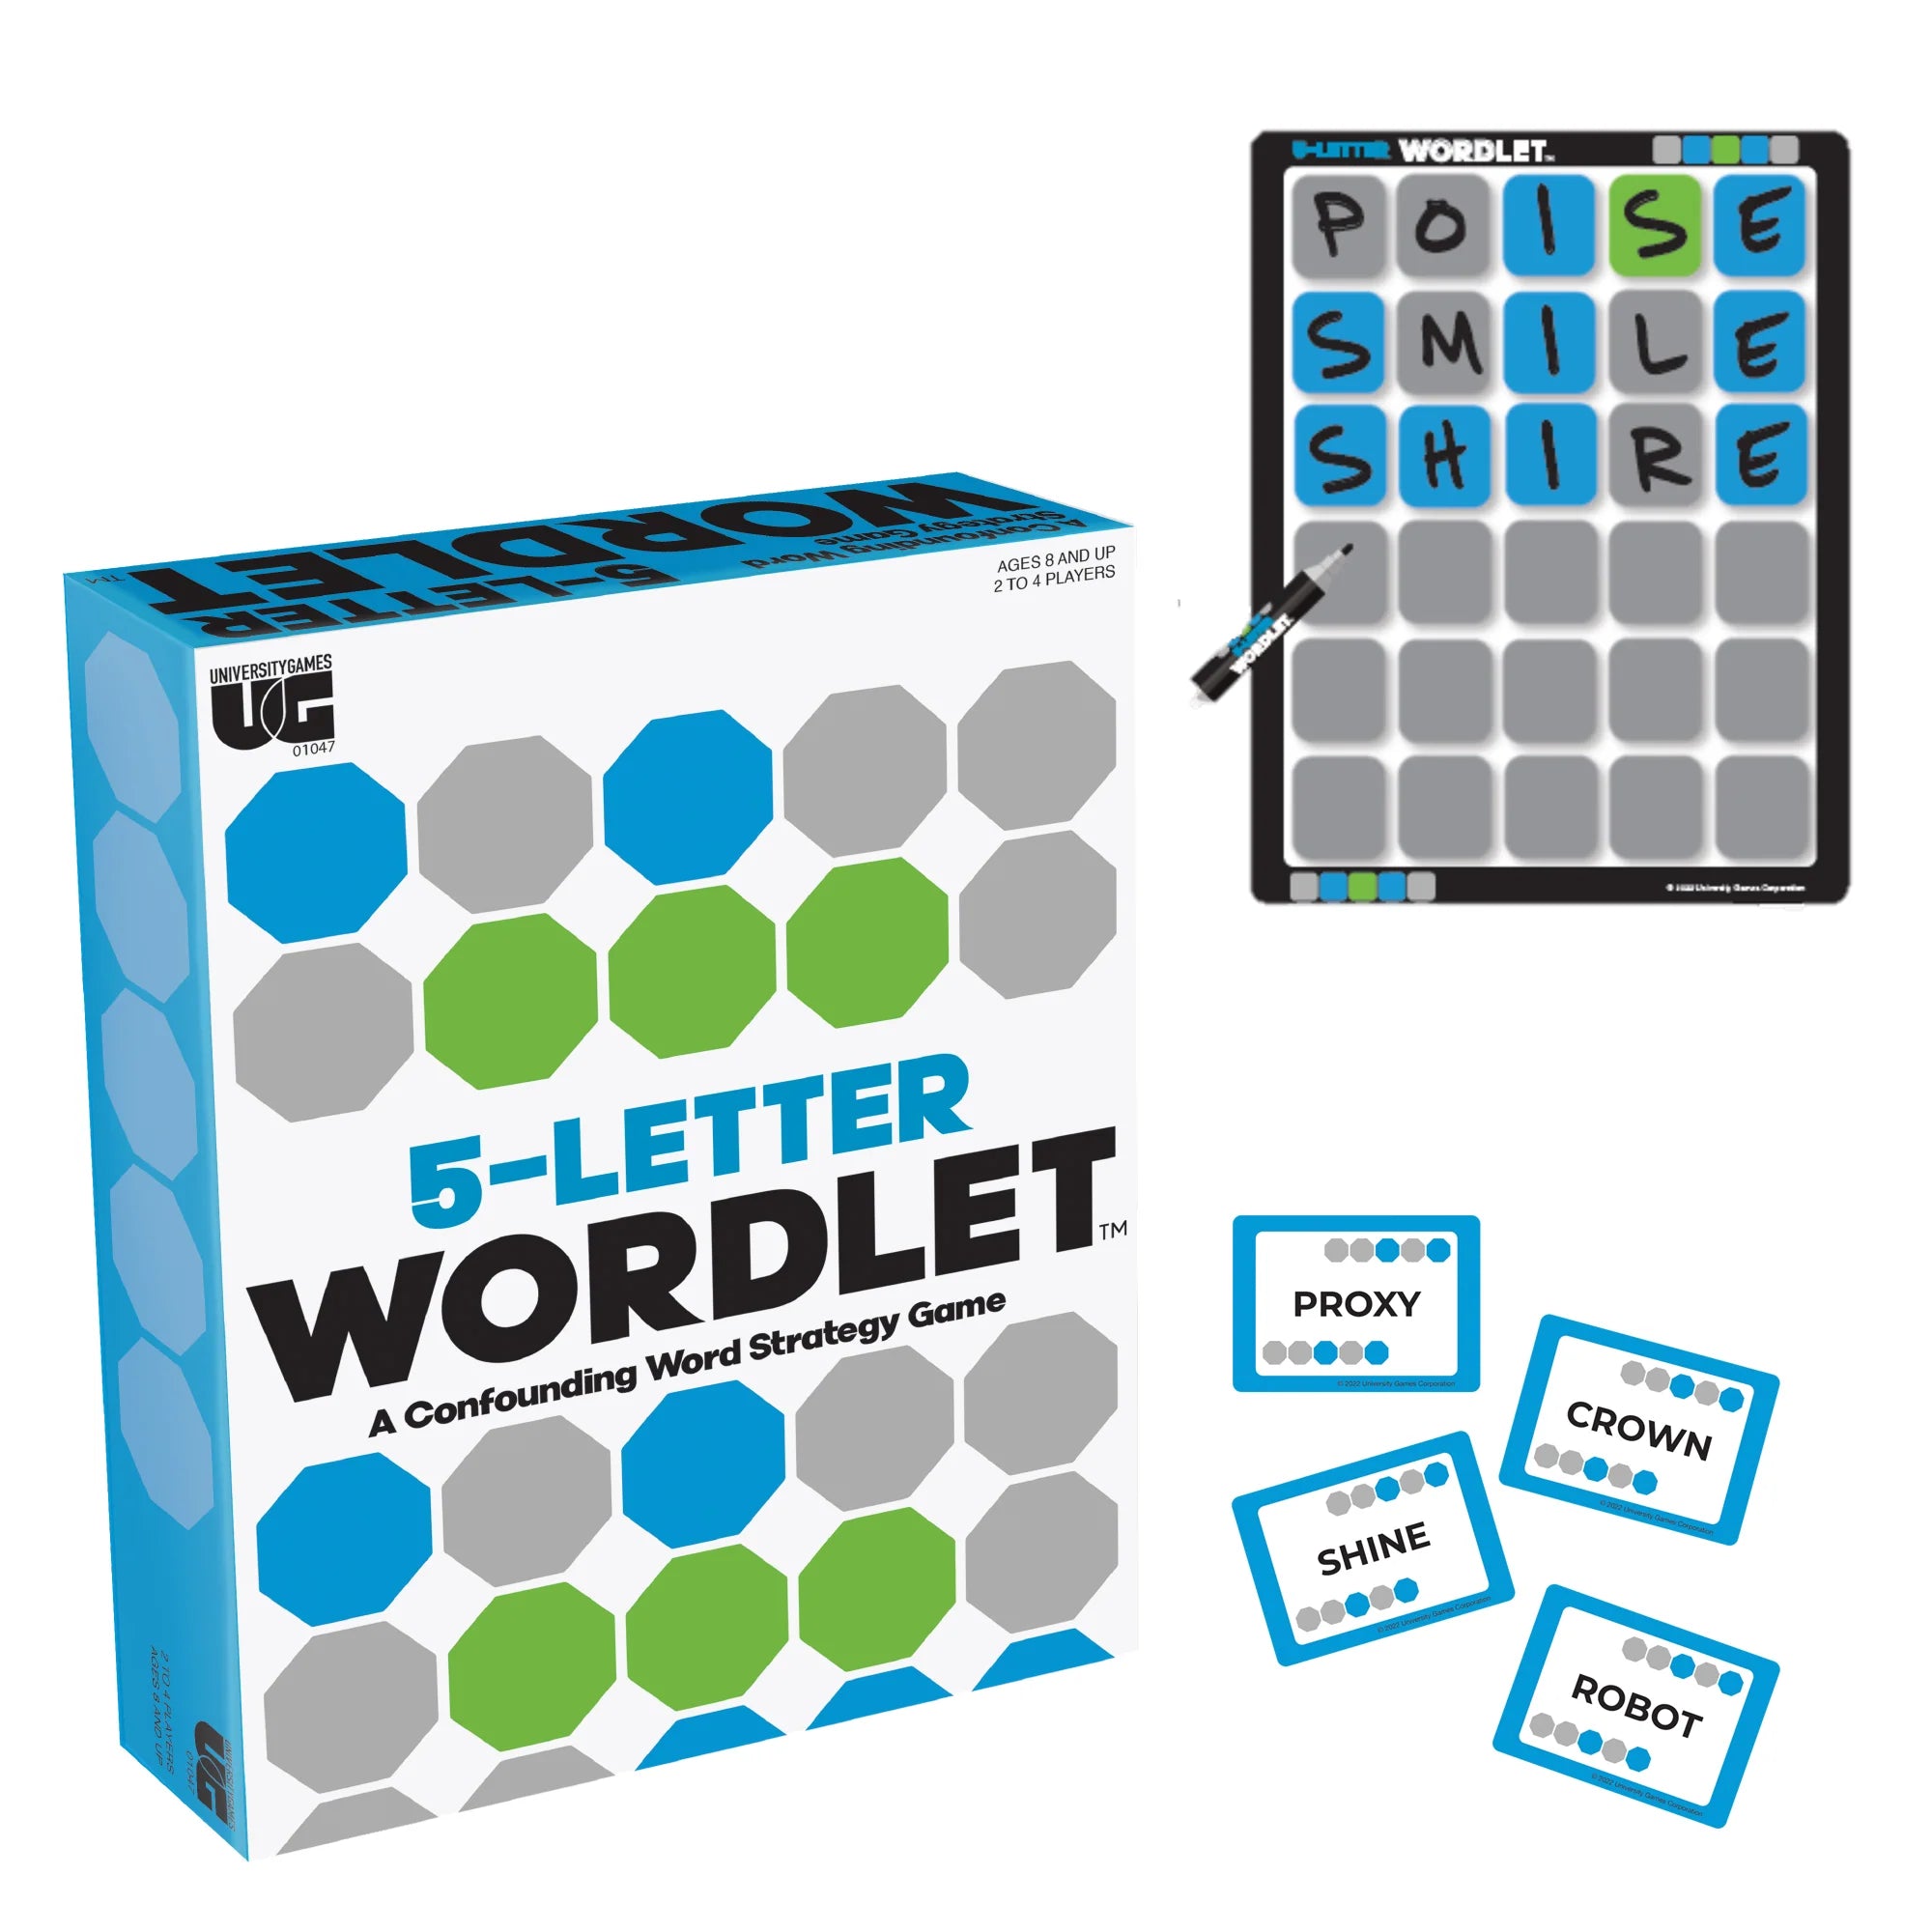 5 Letter Wordlet Word Strategy Game